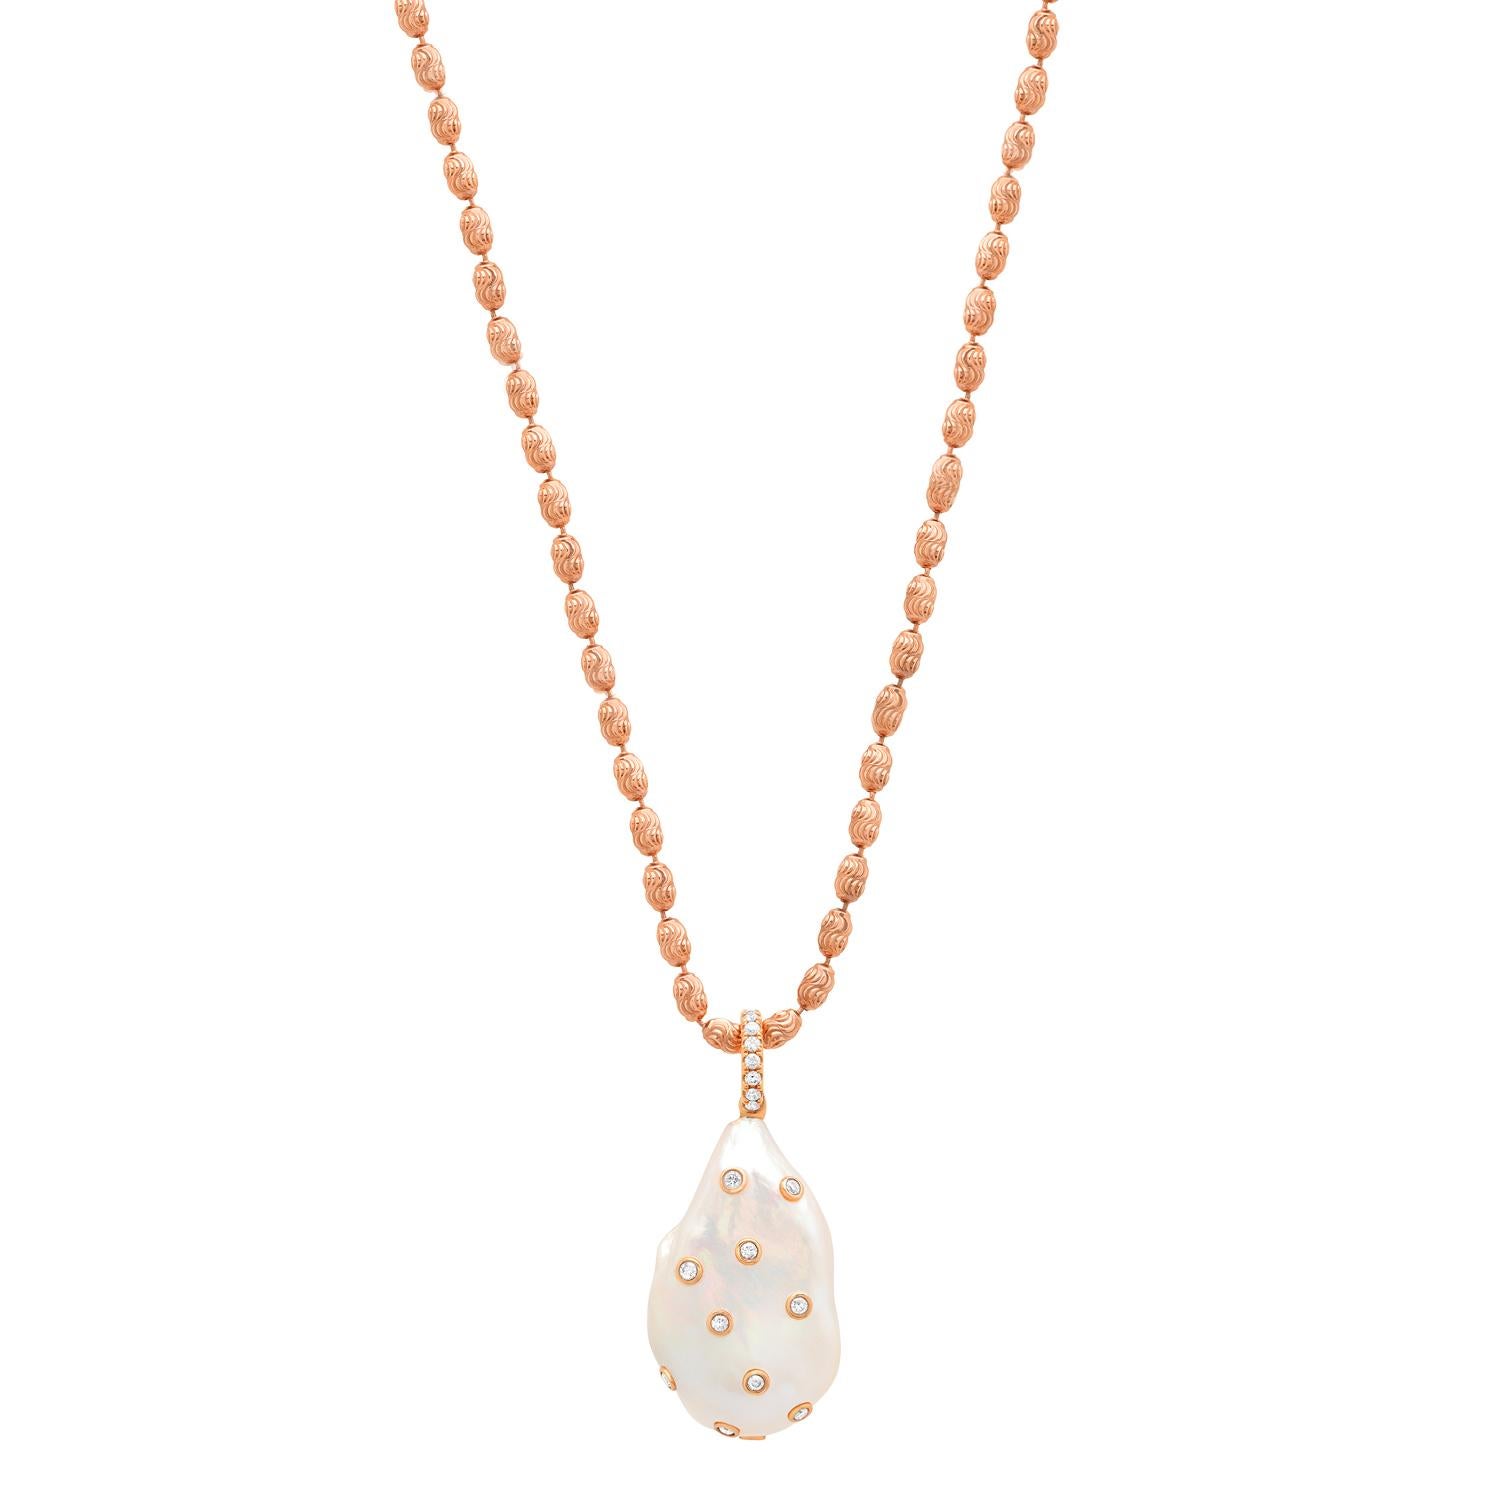 Stunning pendant necklace by Los Angeles based fine jewelry designer, Samira 13. XL Baroque Freshwater pearl pendant with bezel set diamonds in 18K rose gold with Rose Gold Plated Chain. 

Exploring the unique and varied aspects of pearls is the